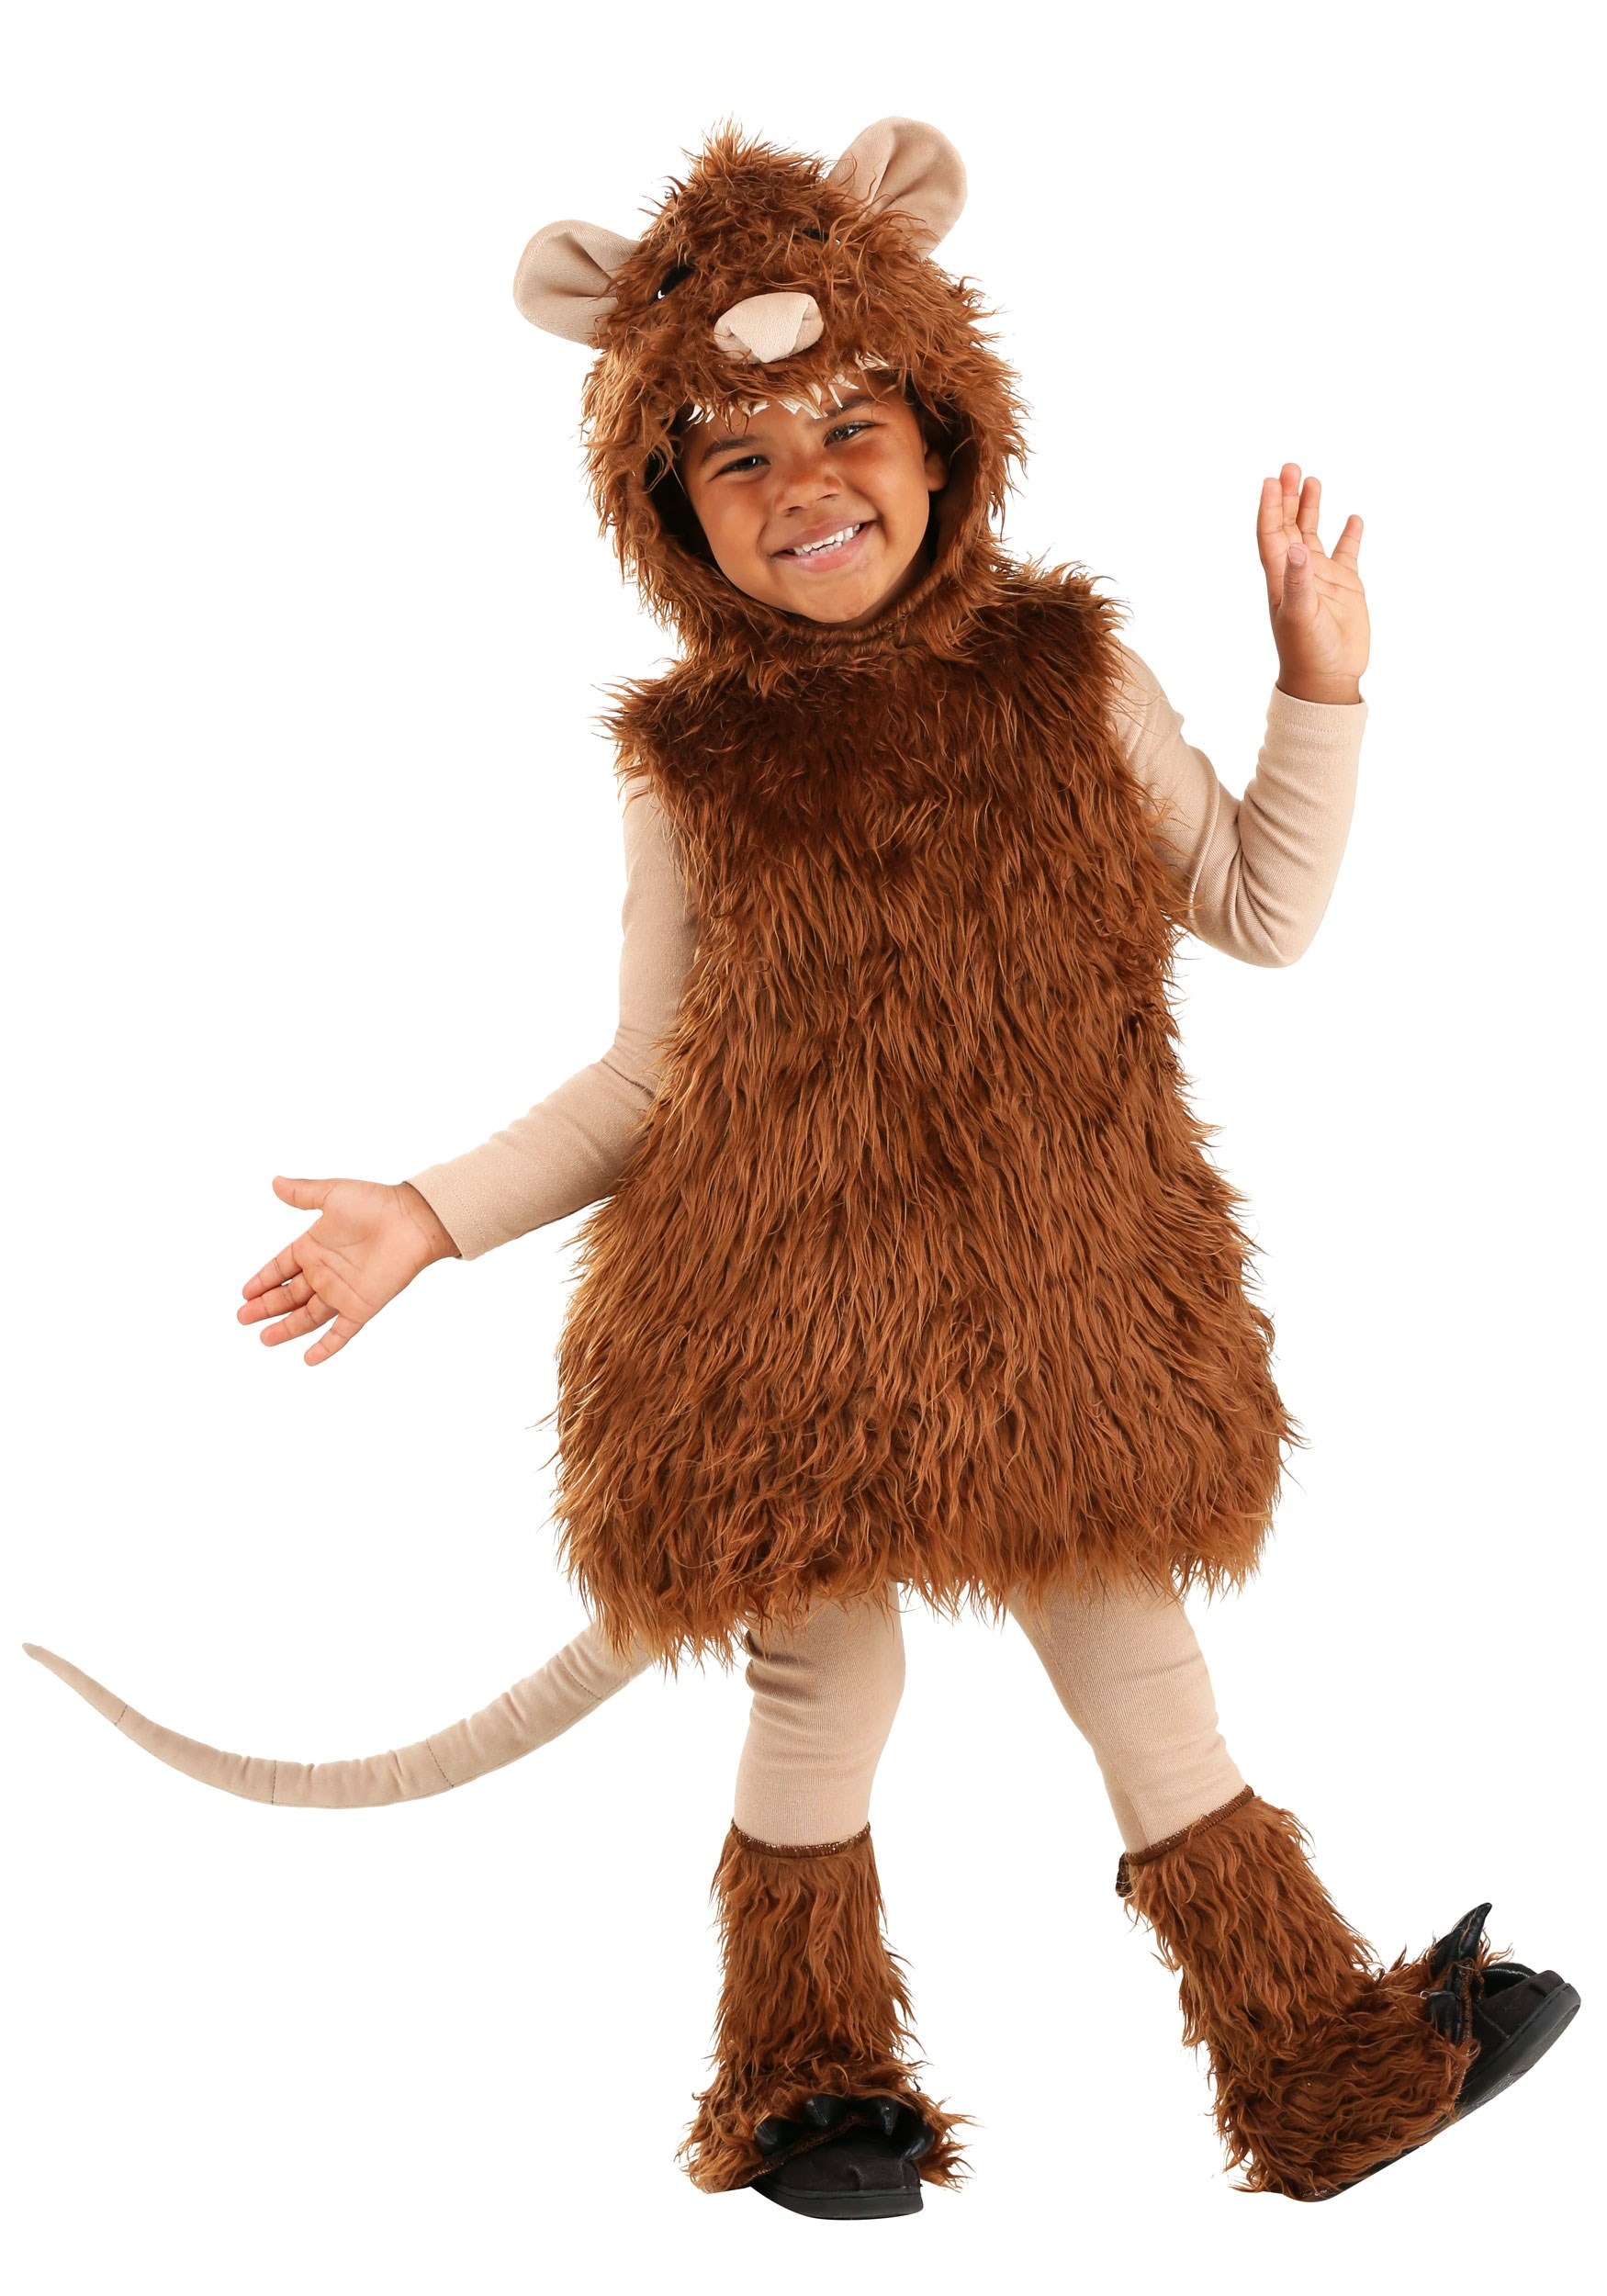 Photos - Fancy Dress Princess FUN Costumes  Bride Rodent of Unusual Size Costume for Toddlers Br 